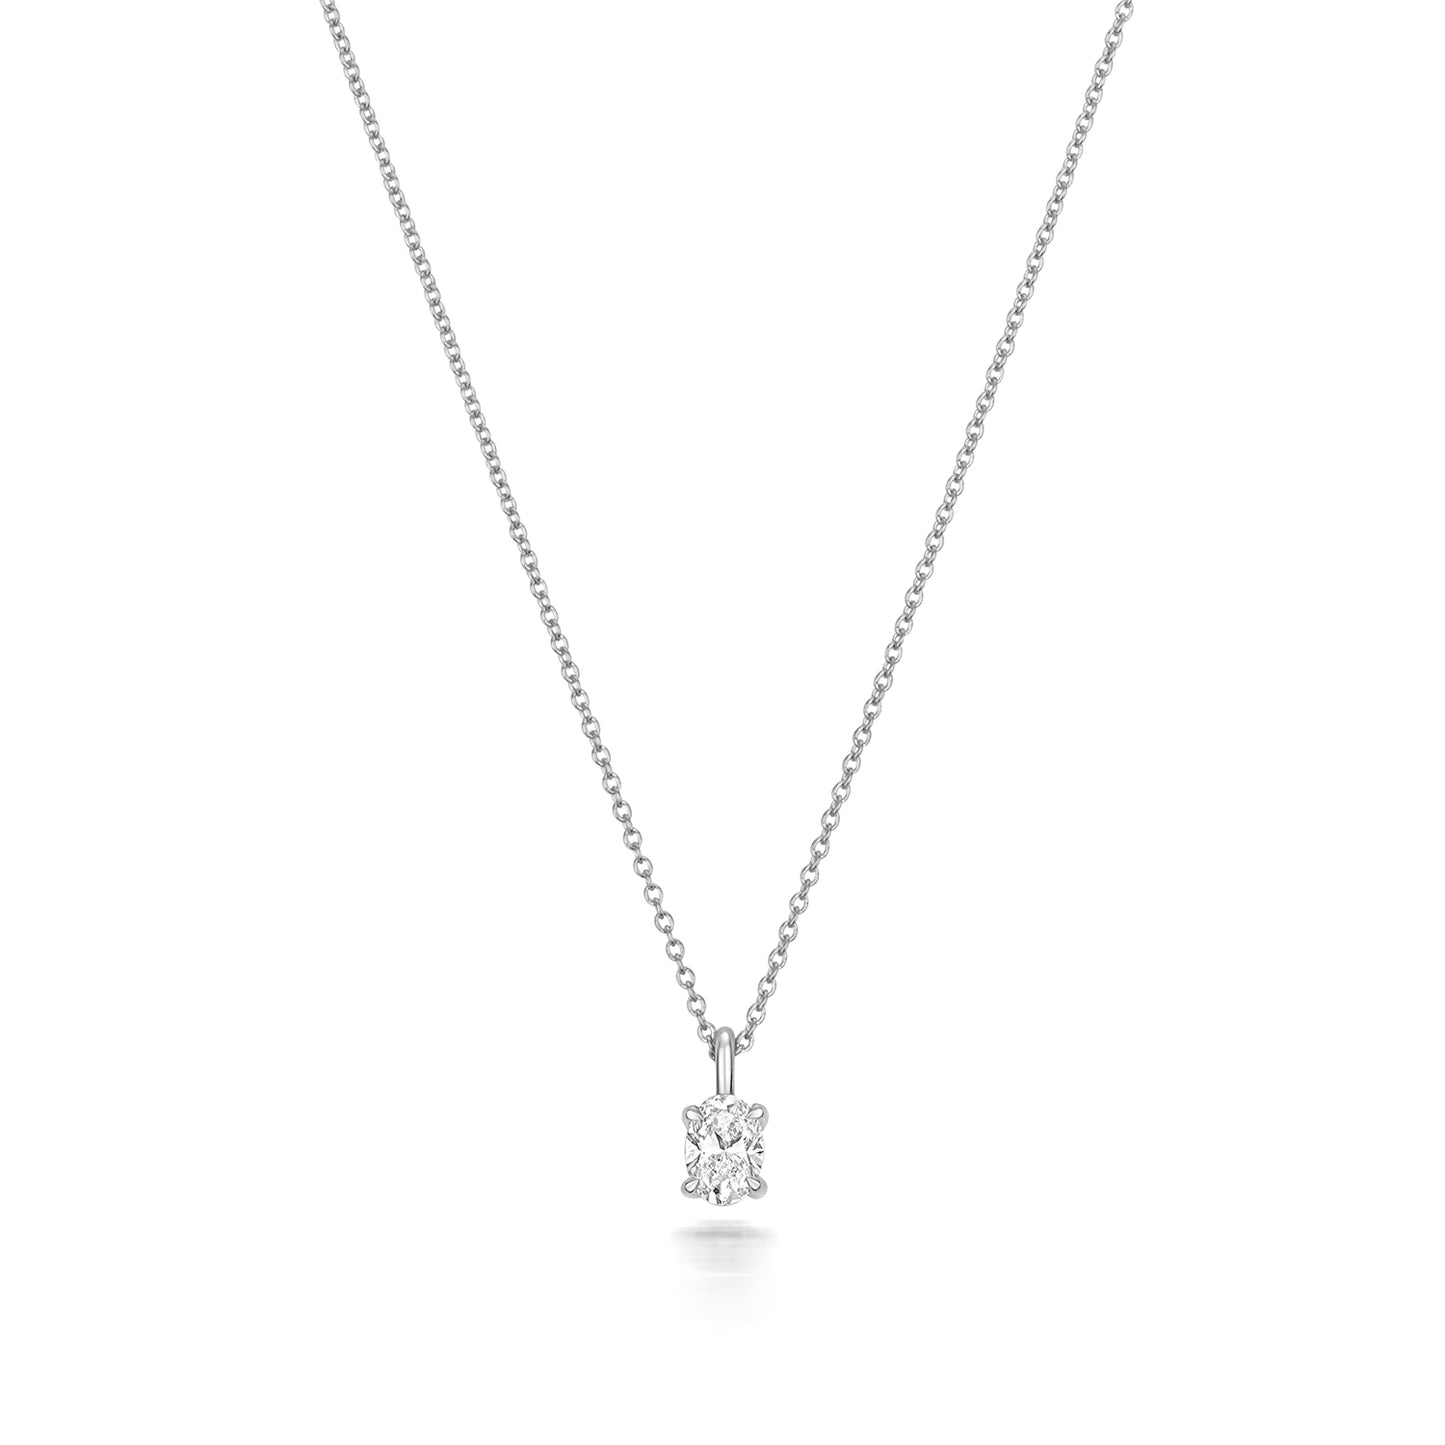 Oval Shaped Diamond Necklace in White Gold on white background.